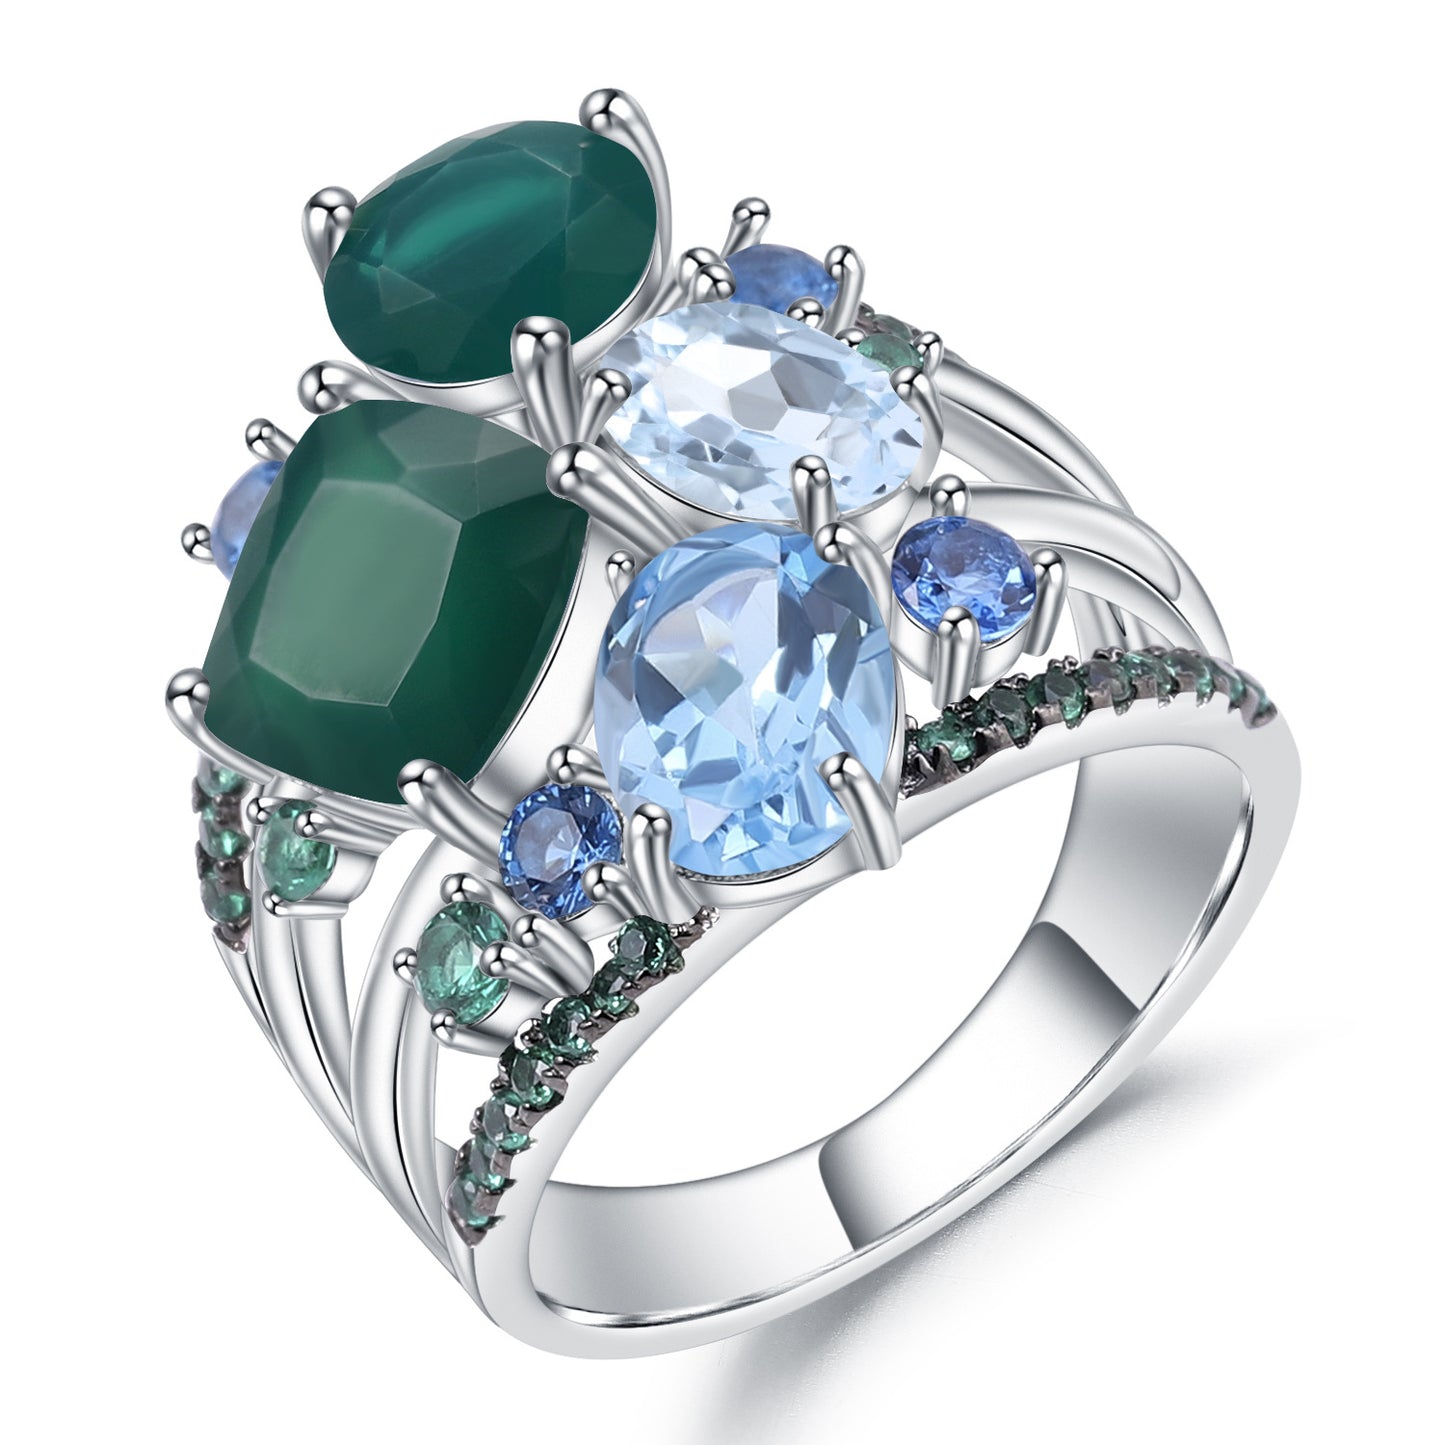 Banquet Jewelry Four Layers Natural Gemstones Silver Ring